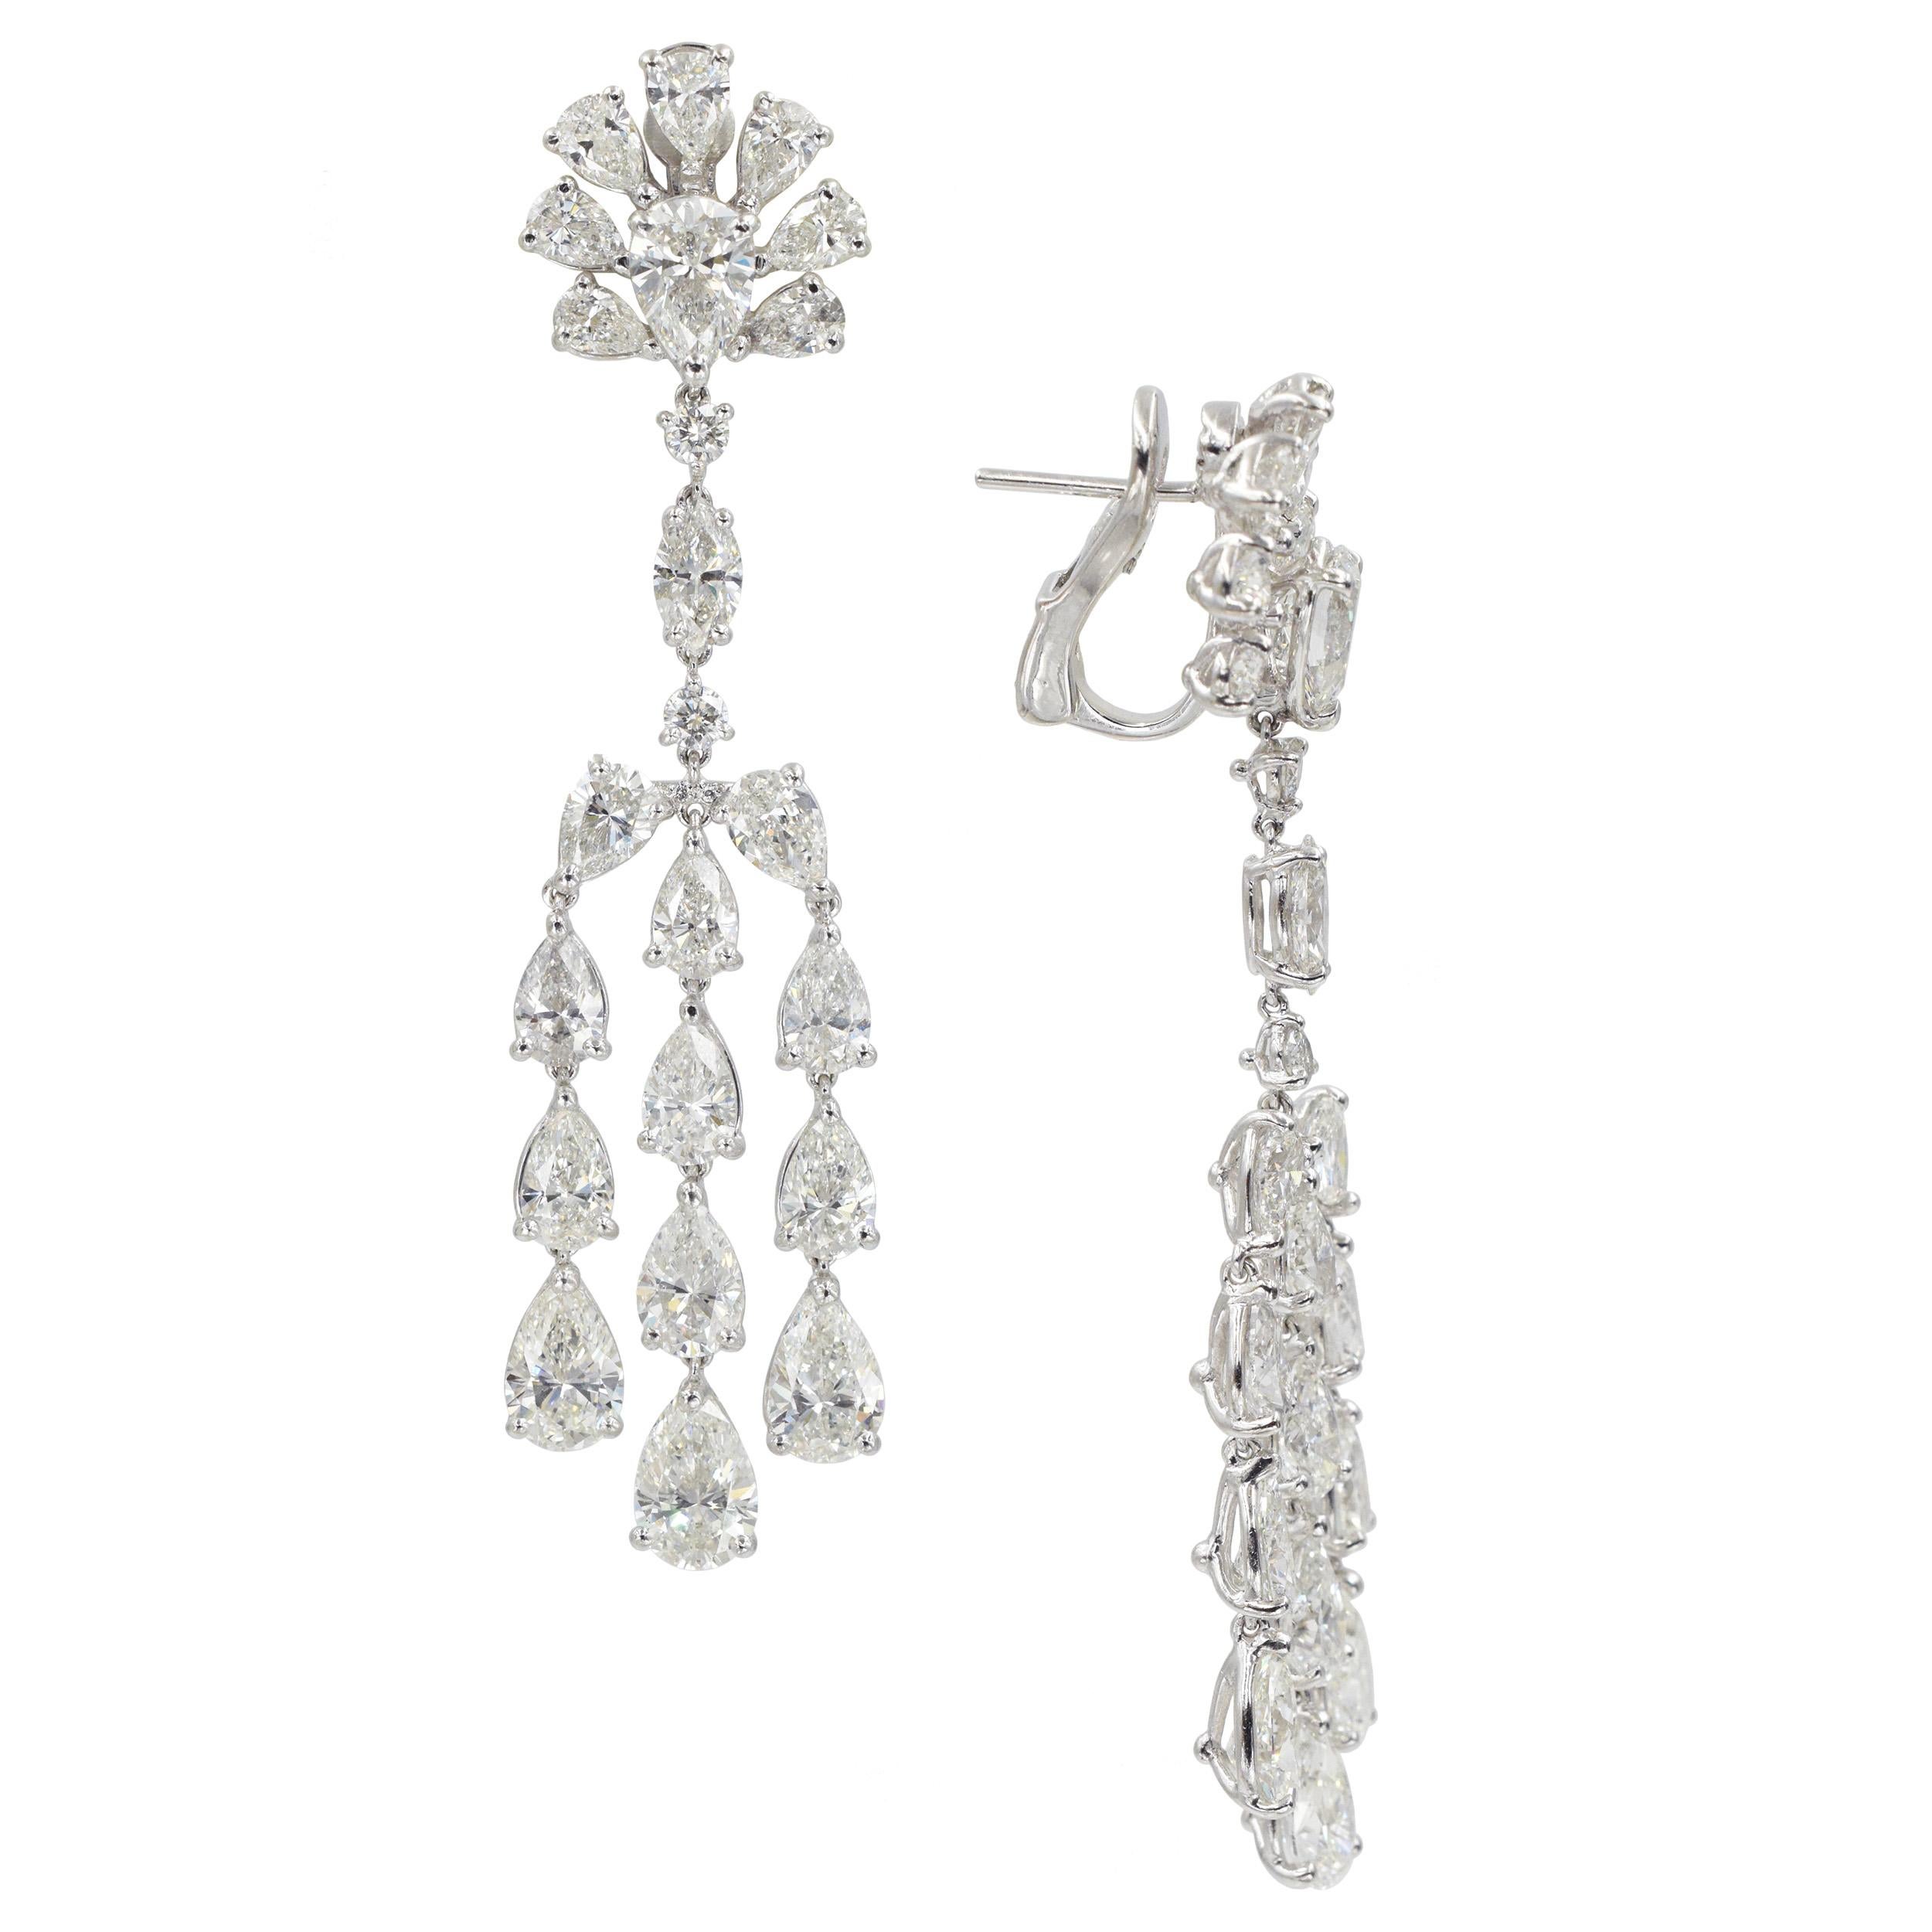 Diamond Chandelier earrings  In Excellent Condition For Sale In New York, NY